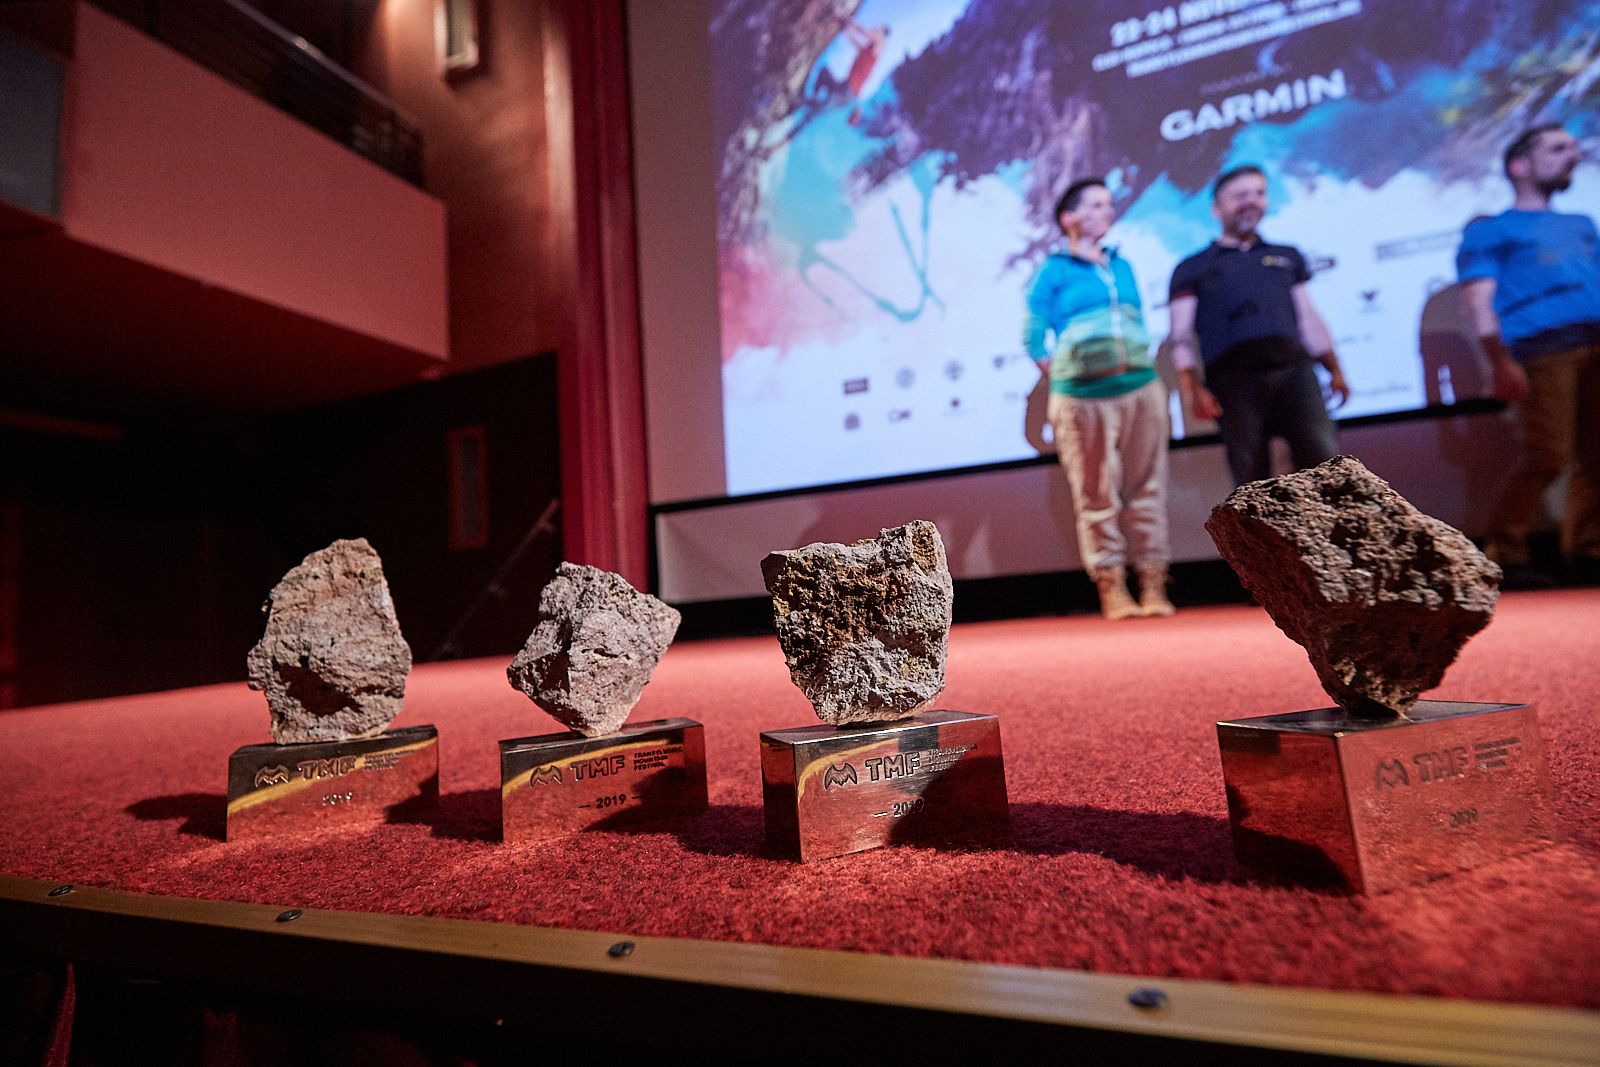 Enjoying a wide international participation in all competitions, this year we are once again honored to present the winners of the film, photography, innovation and mountain activity awards. 